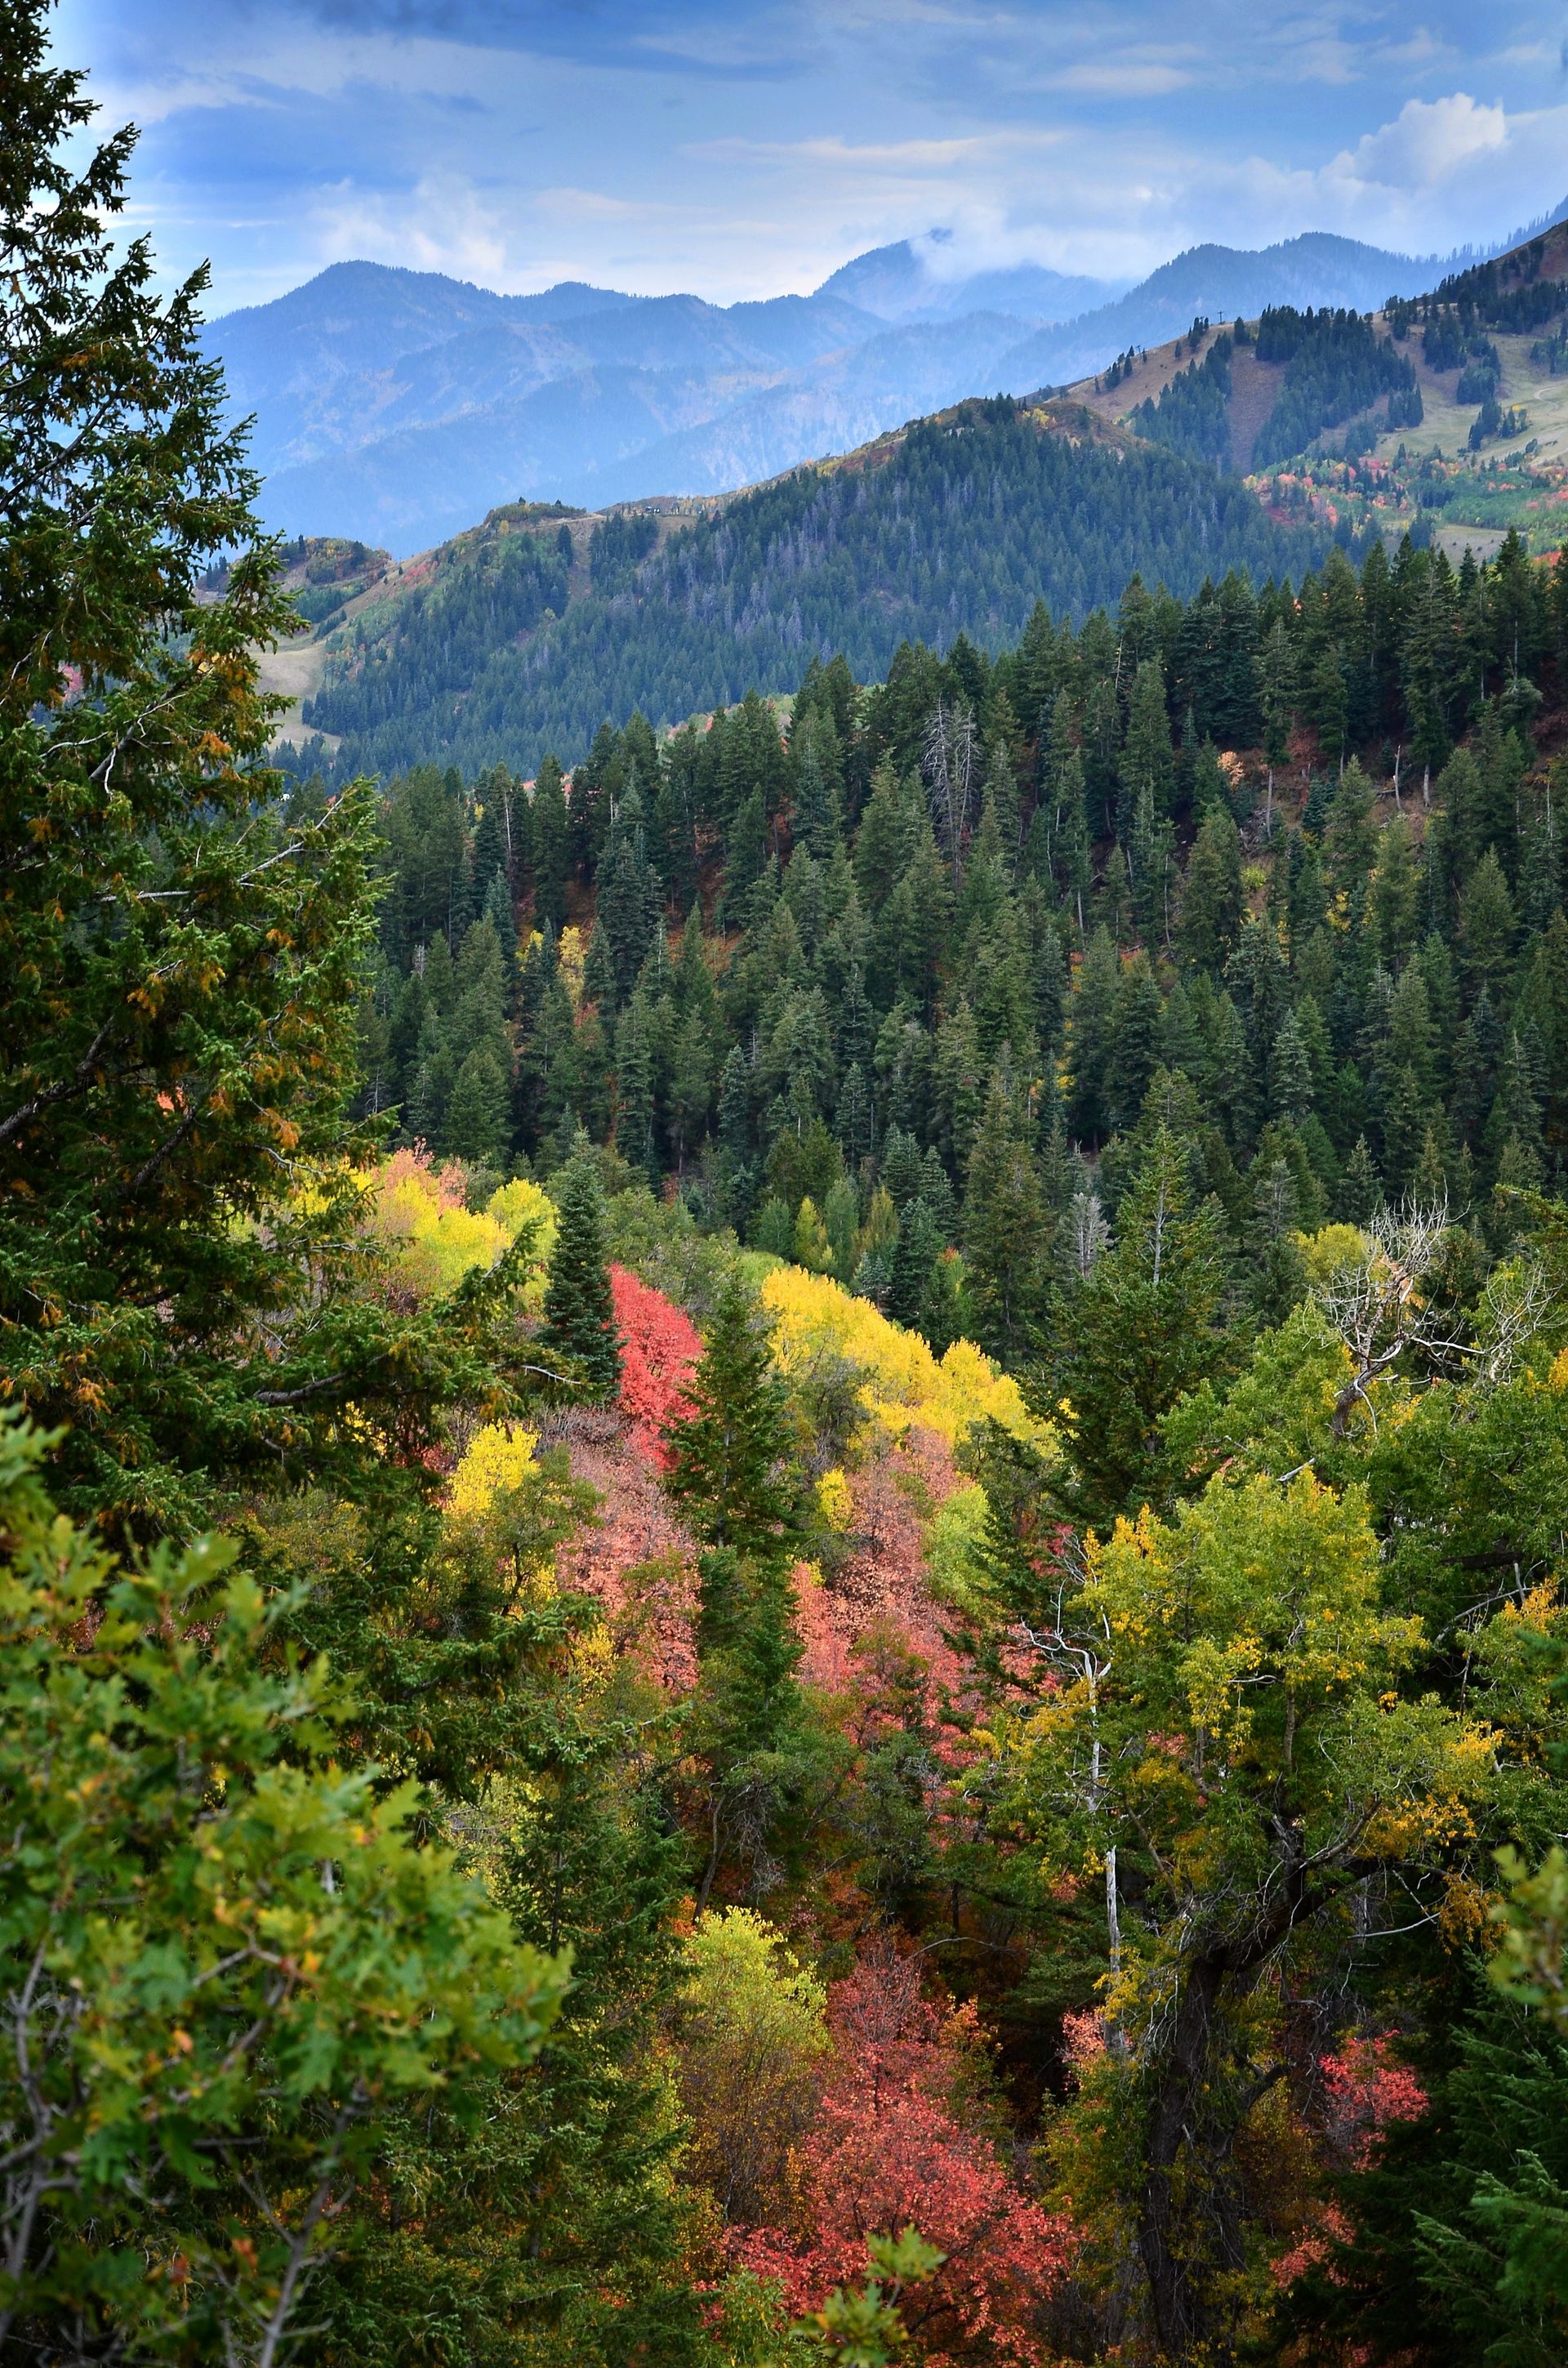 Scenery of leaves changing colors in the mountains.